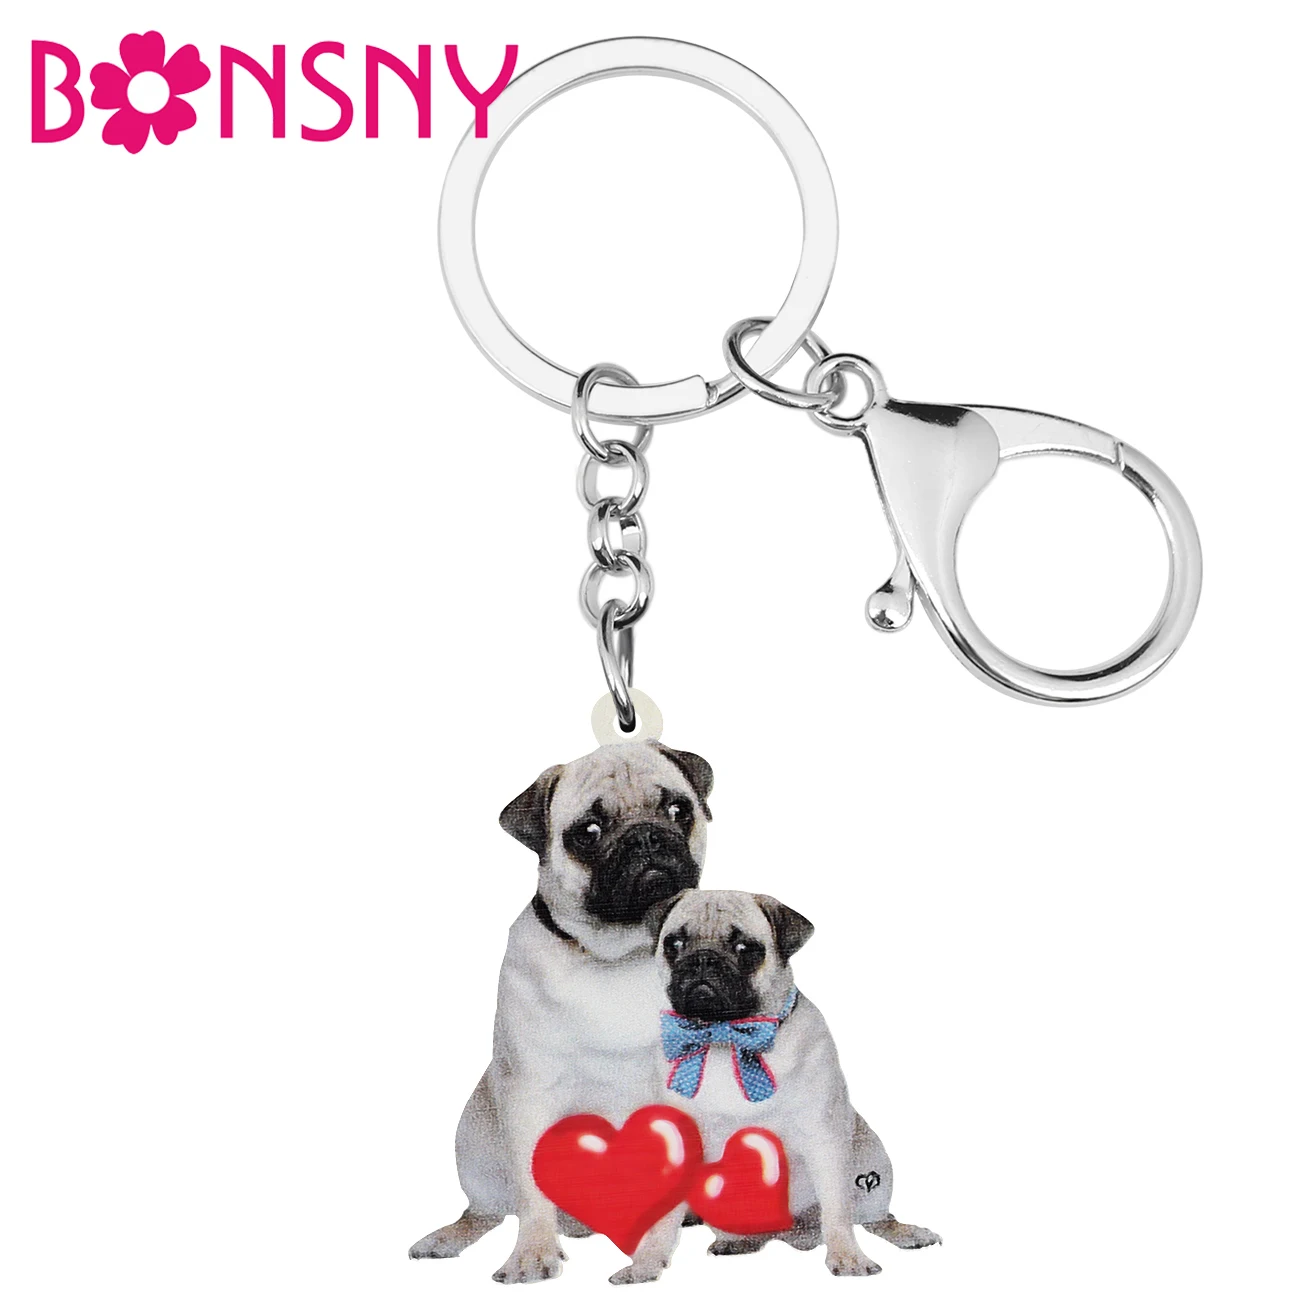 

BONSNY Mother's Day Acrylic Brown Sweet Pug Dogs Keychains Ring Fashion Key Chain Pets Jewelry For Women Girls Teens Gifts